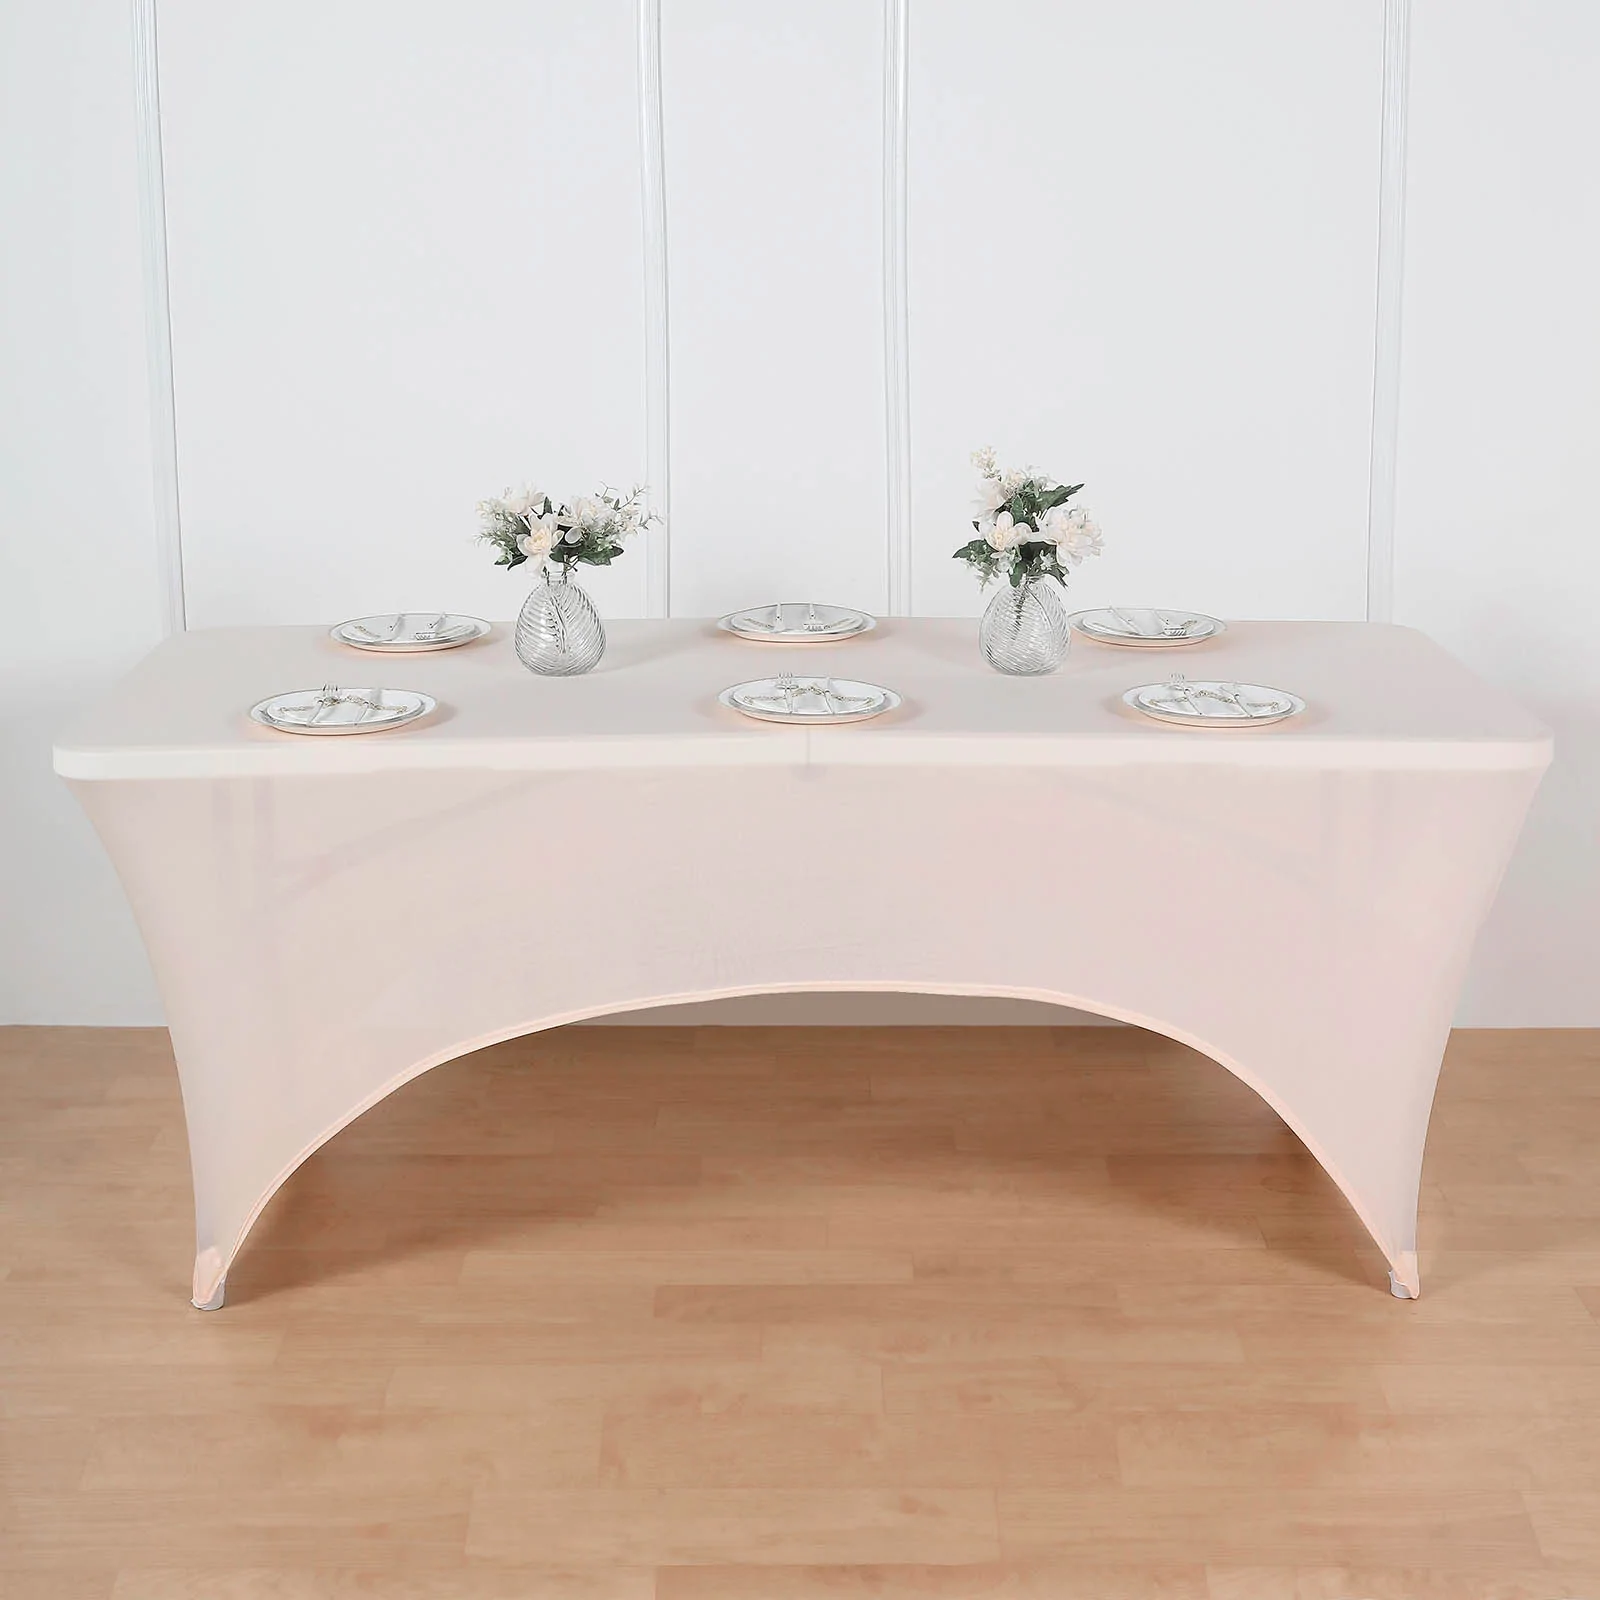 Rose Gold - 6 Ft Rectangular Spandex Table Cover Wedding Party - $49.06